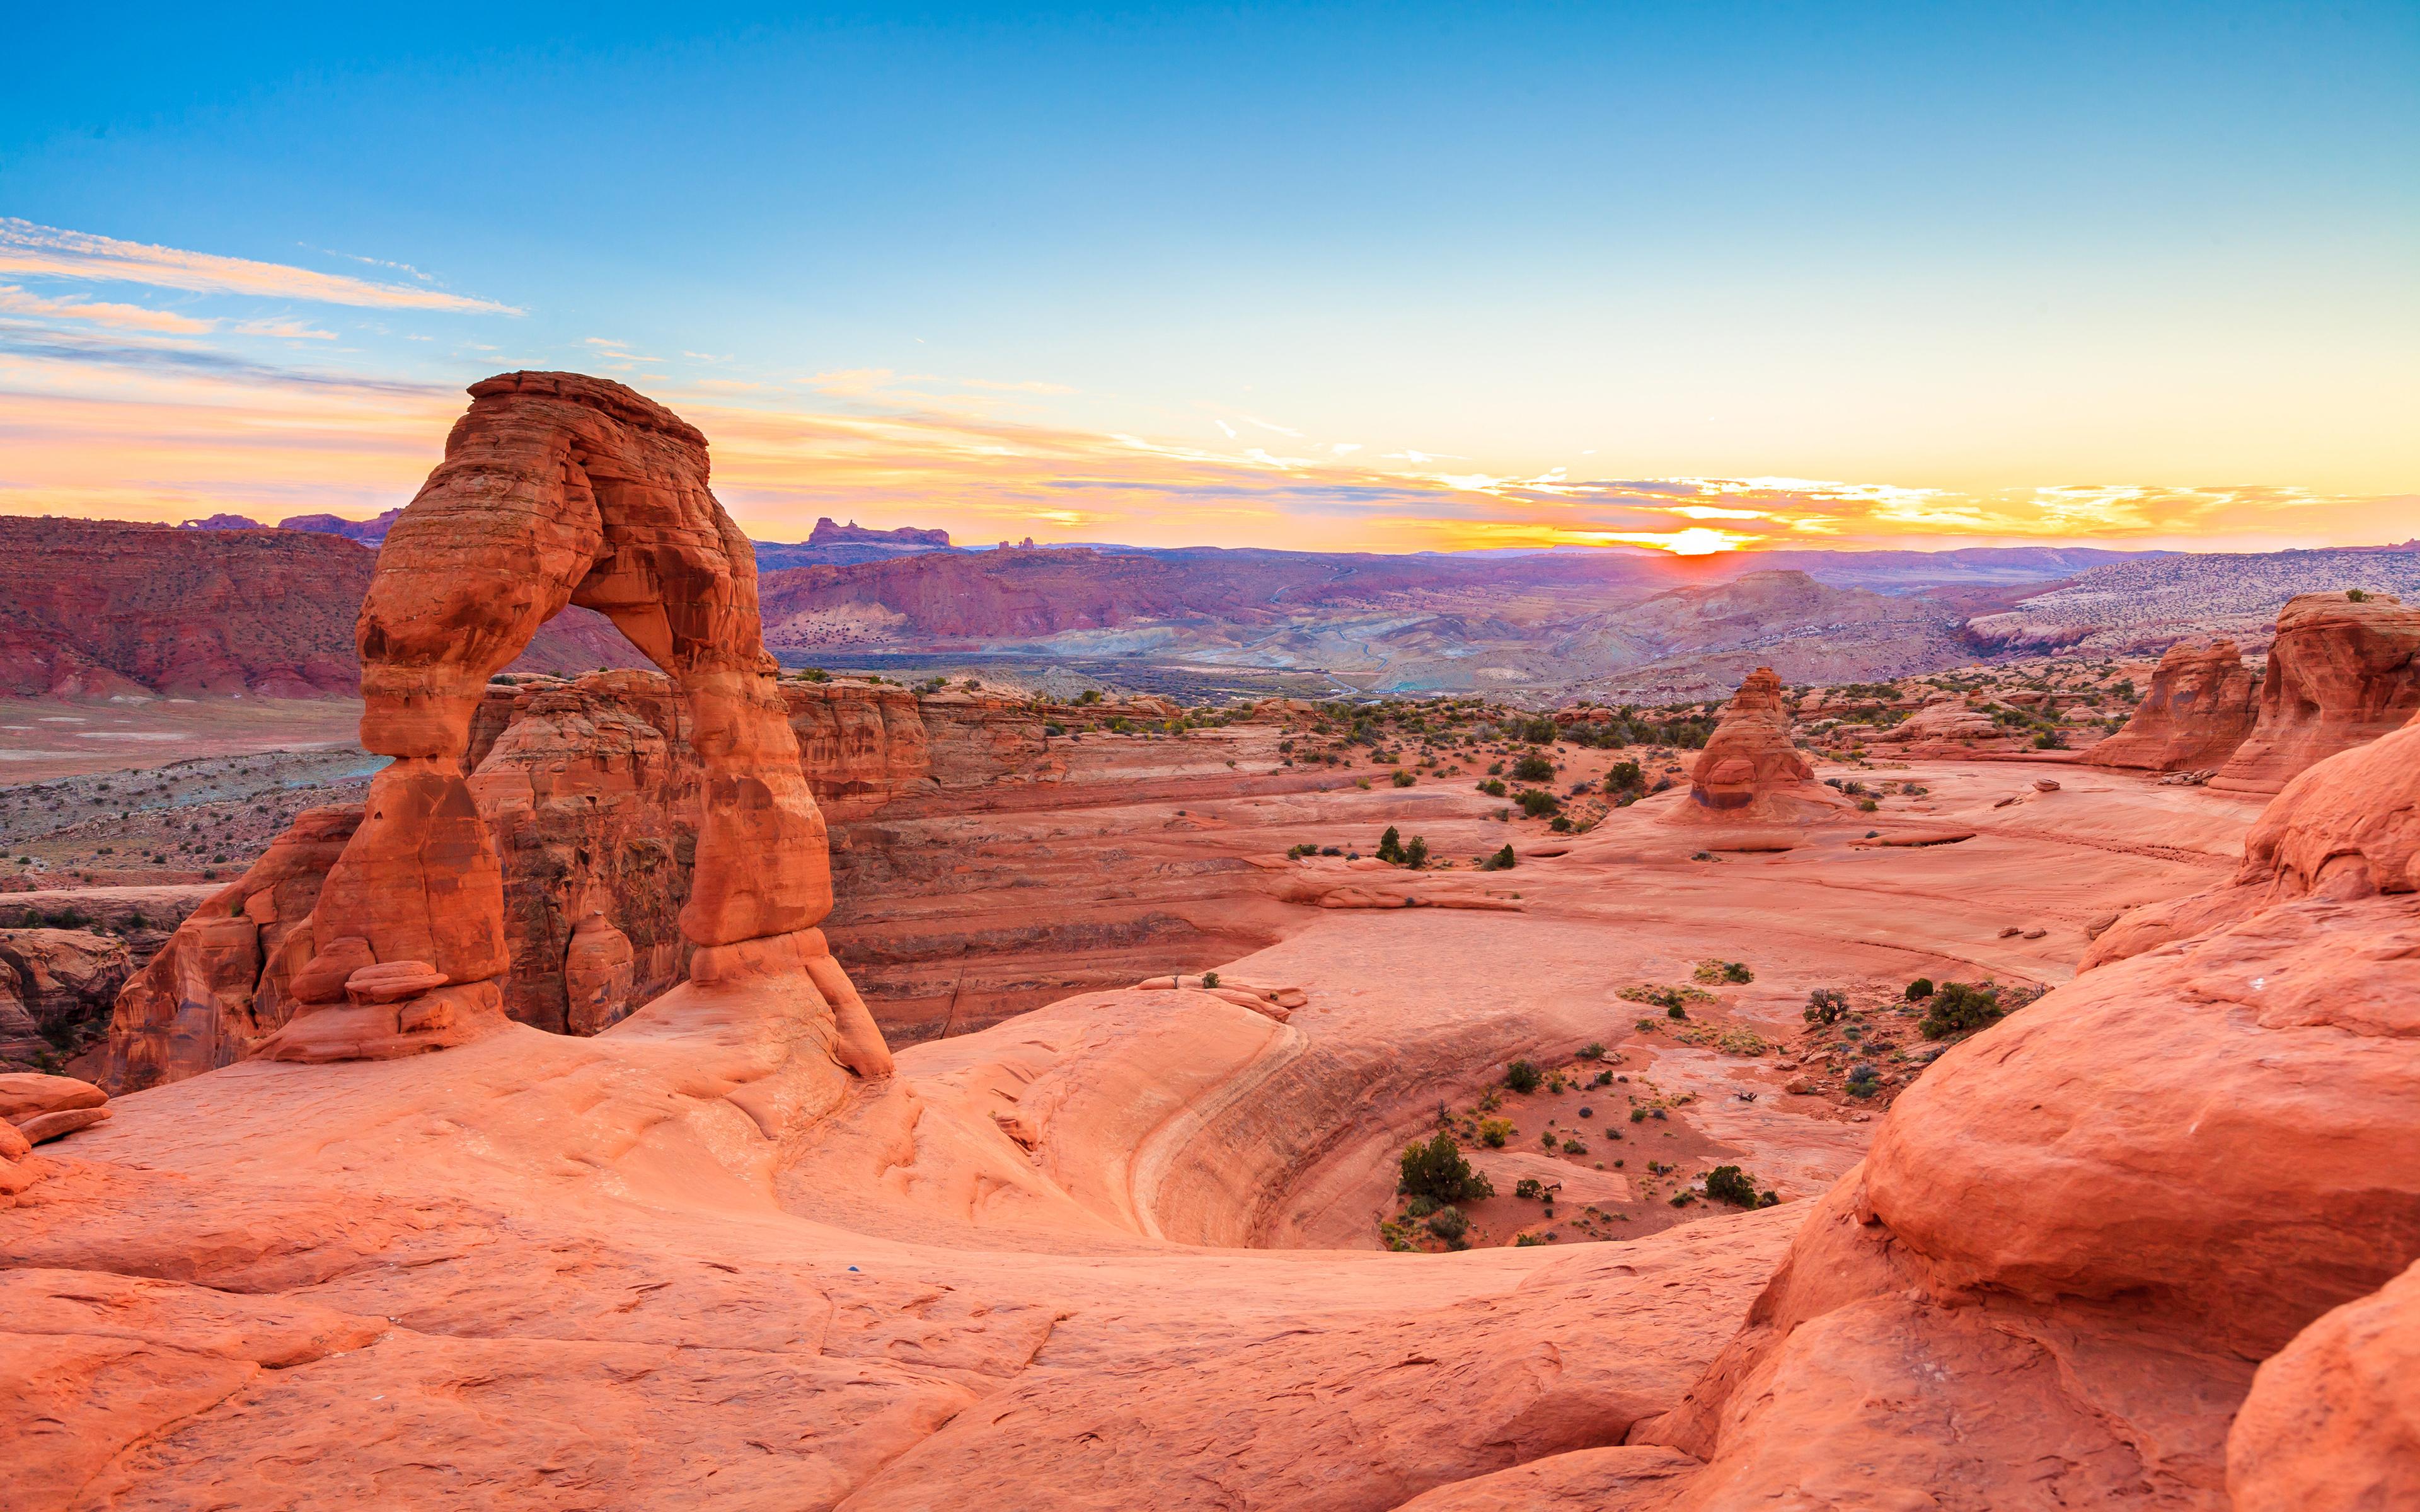 Arches National Park 4k Ultra HD Wallpaper. Background